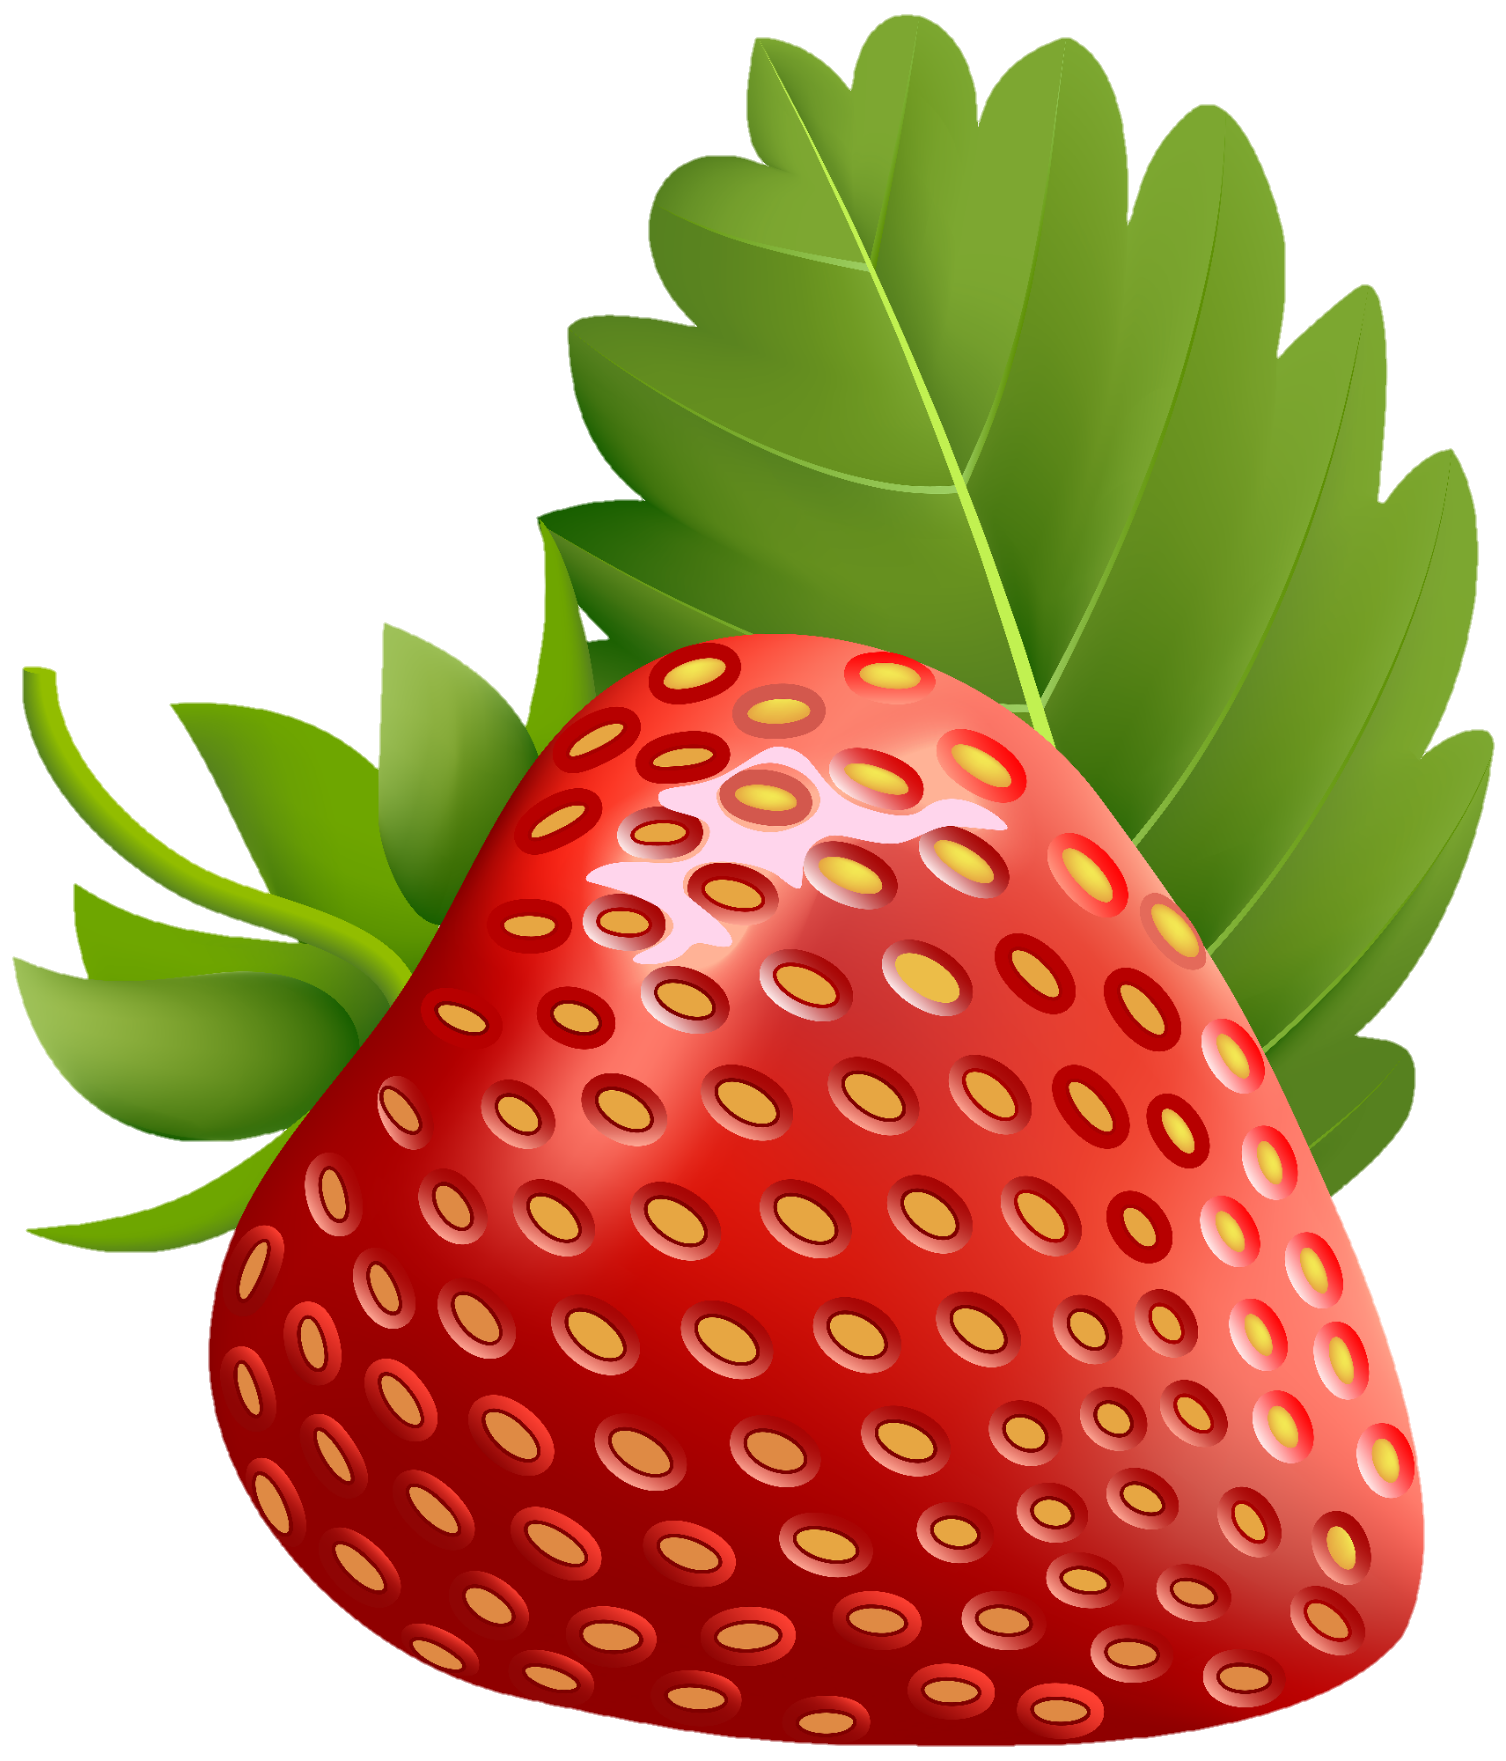 strawberry-png-image-from-pngfre-6